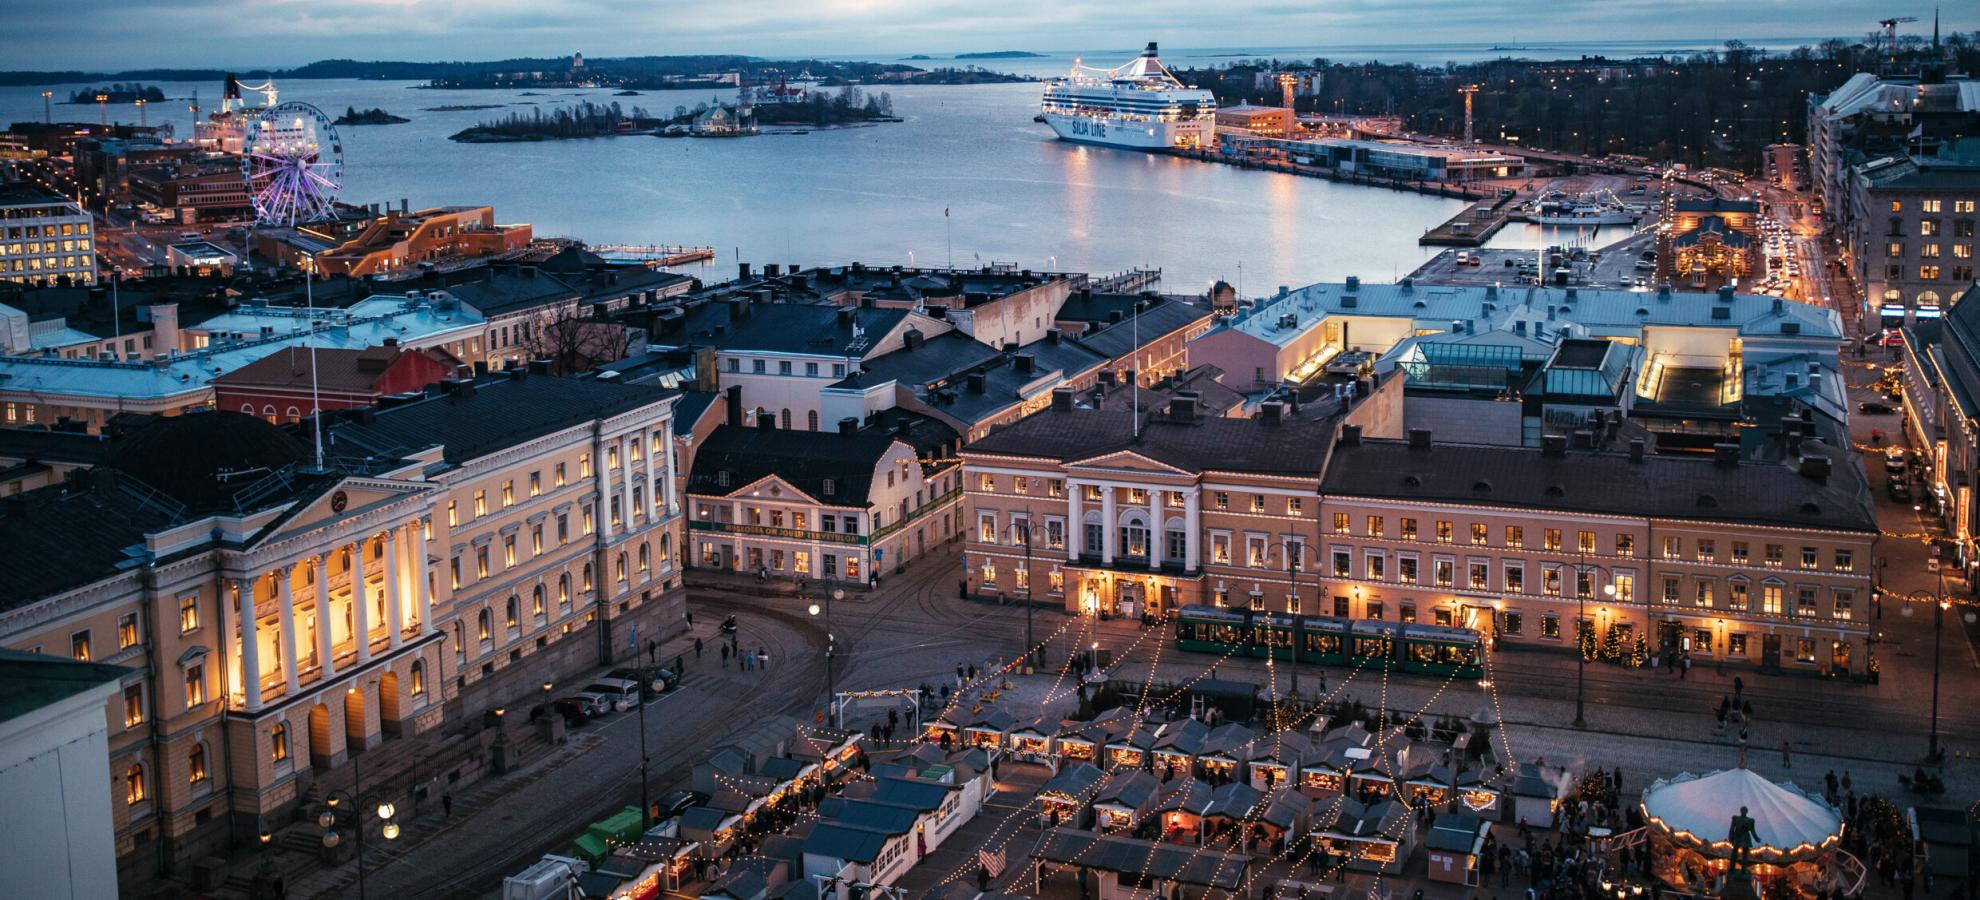 Aerial view from above Helsinki Cathedral, with the Senate Square in the frame, looking out towards Helsinki harbour in the evening 